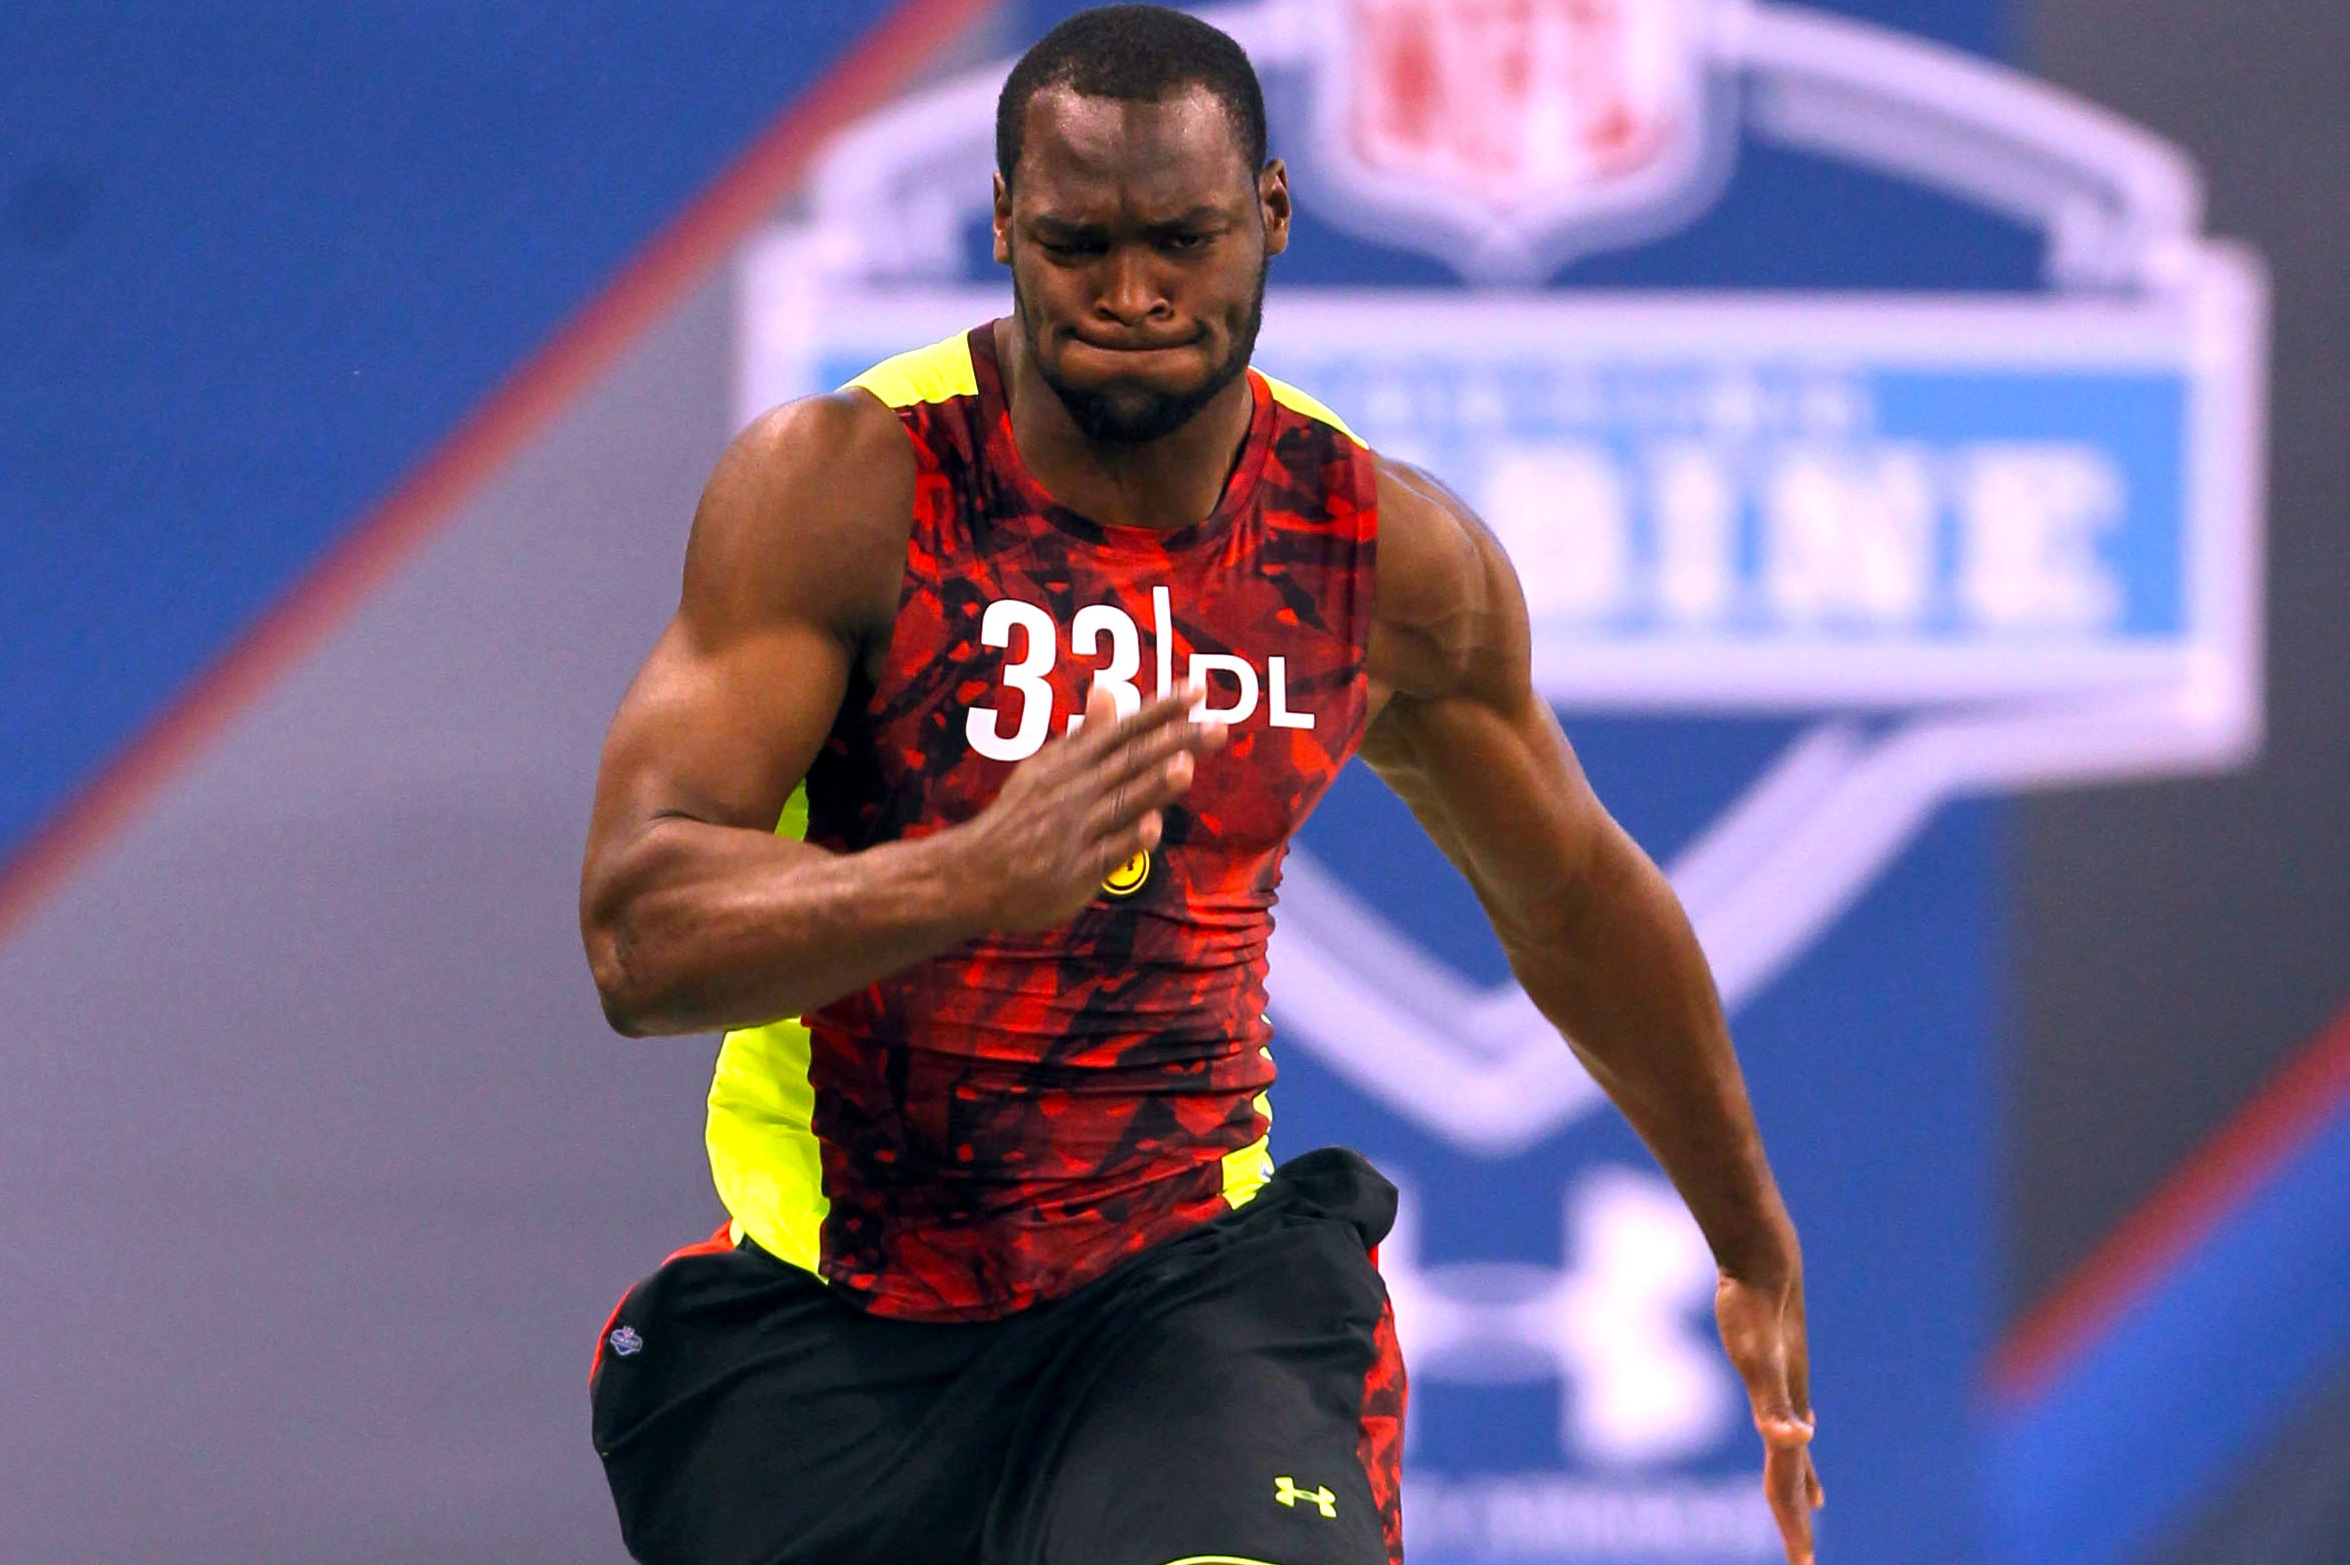 NFL Combine Results 2013: Tight Ends - Acme Packing Company